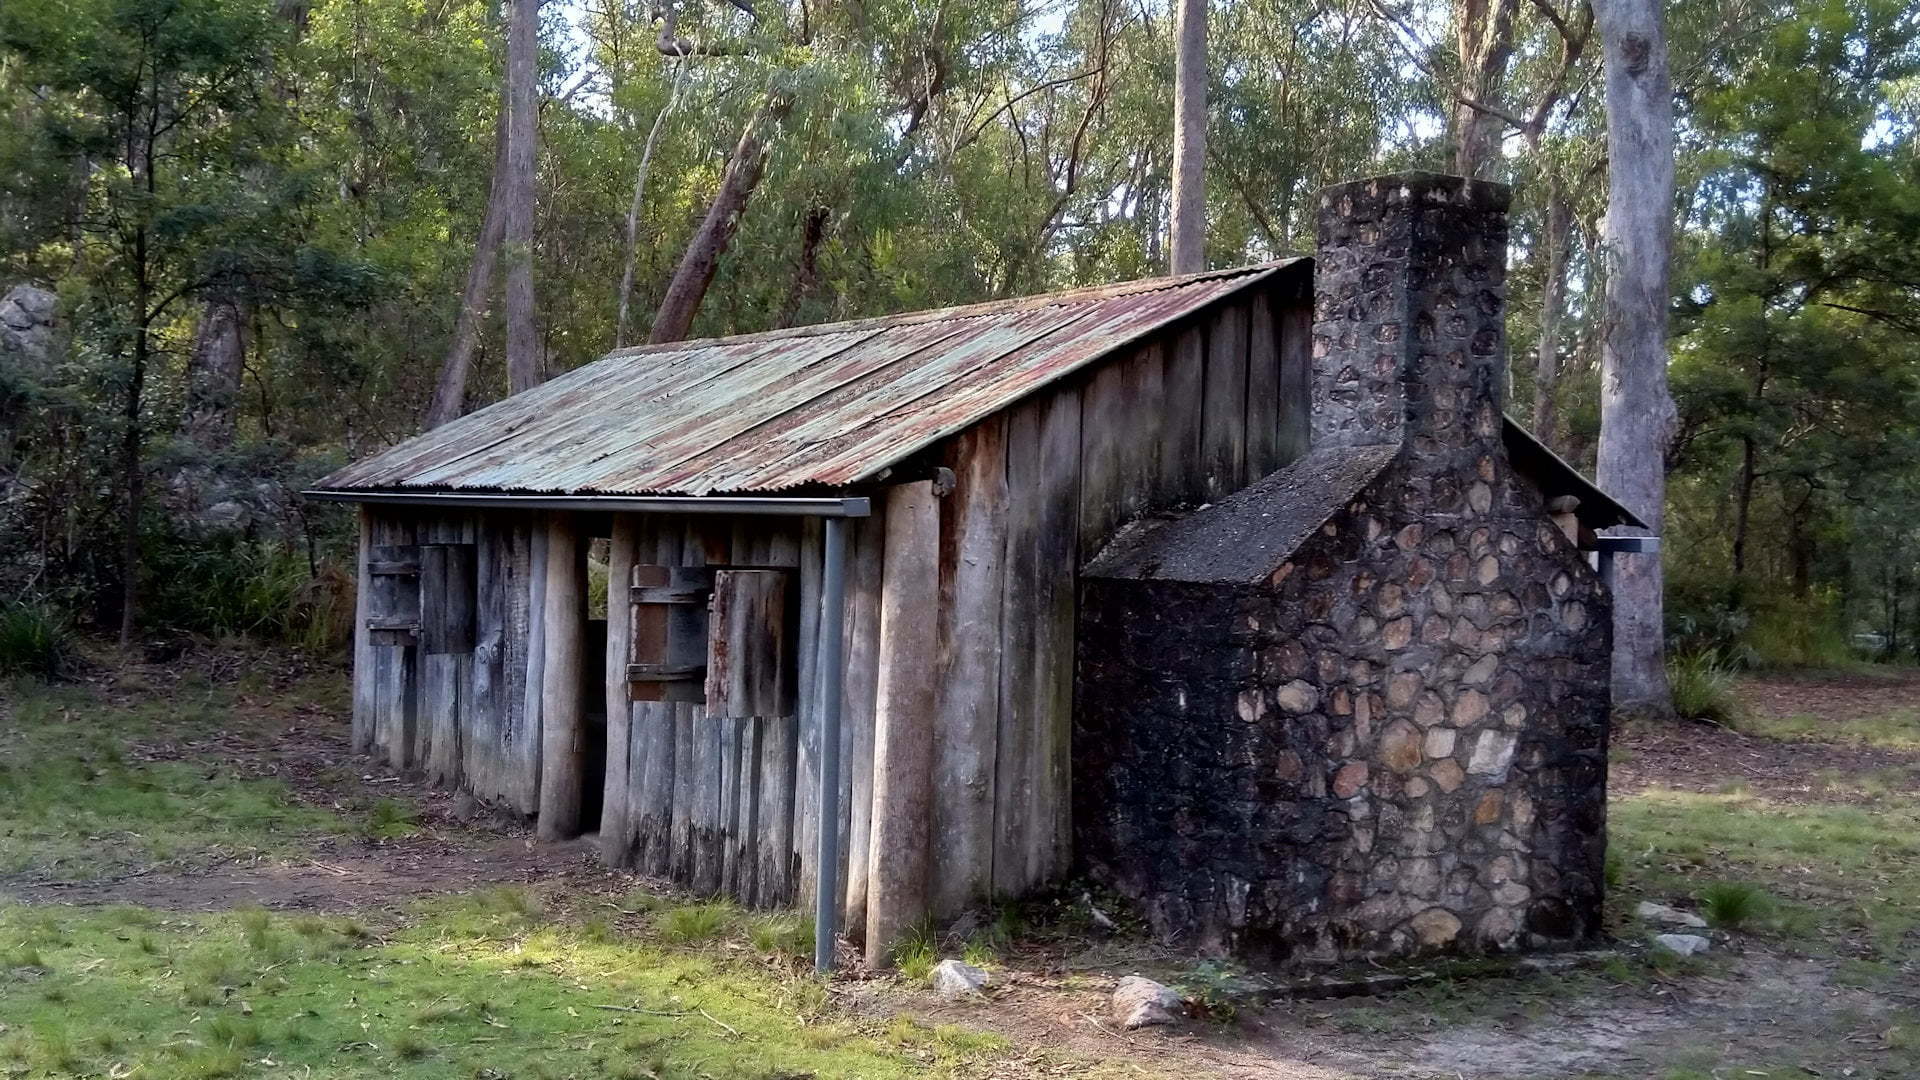 Slab hut with iron roof and stone fireplace and chimney on the end, taken of Mulligan's Hut in Gibraltar Range National Park